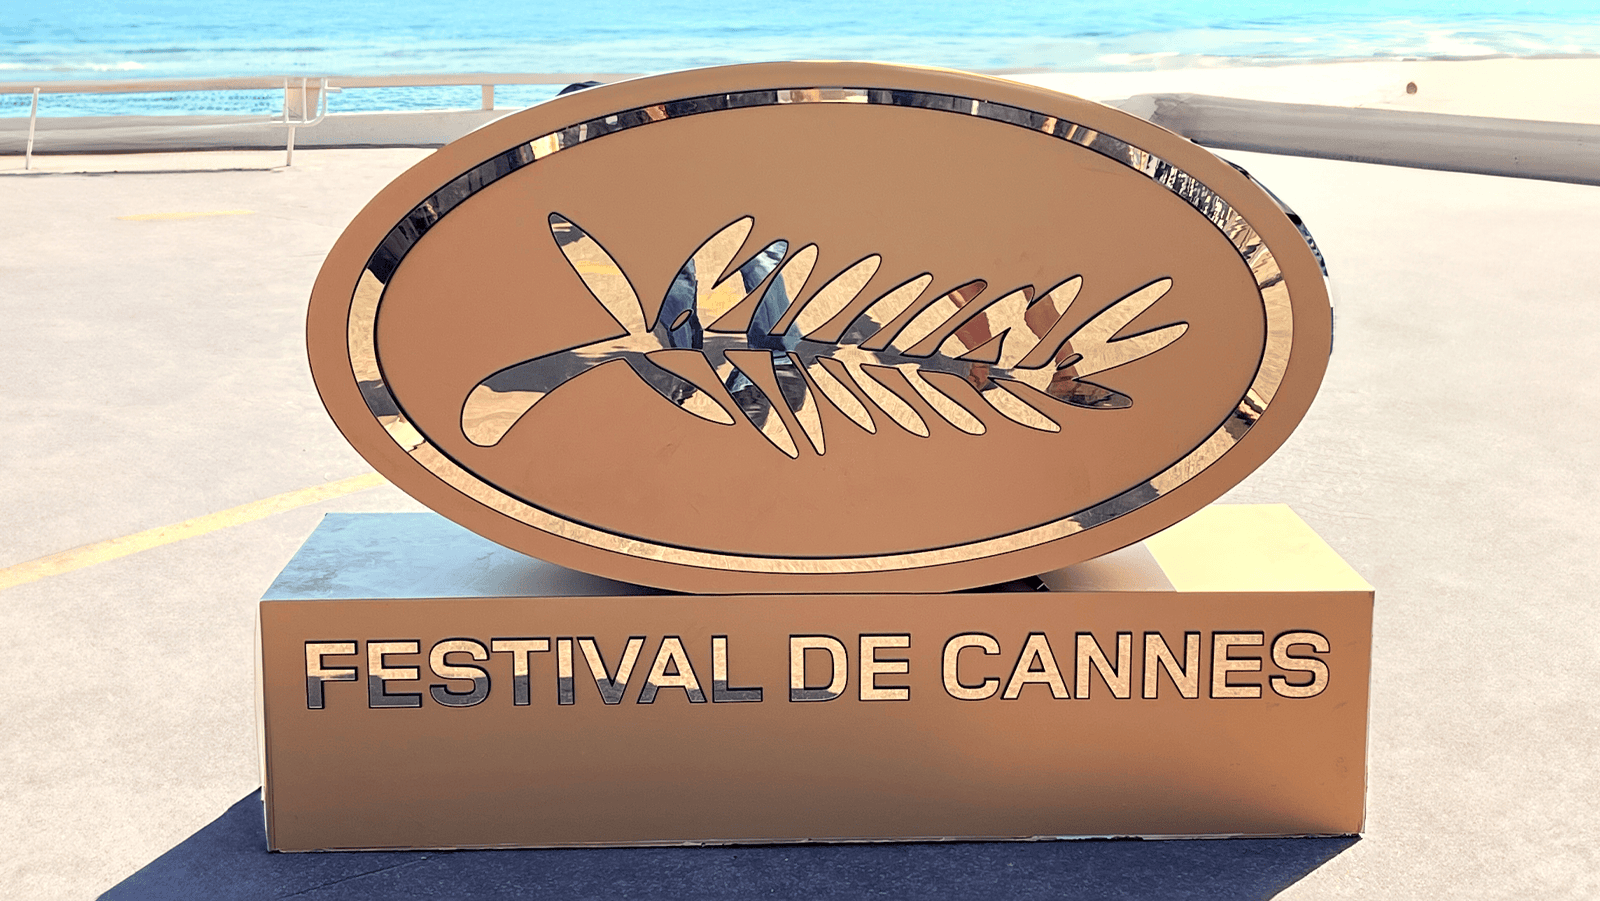 PART 1: FIVE REAL REASONS TO GO TO CANNES